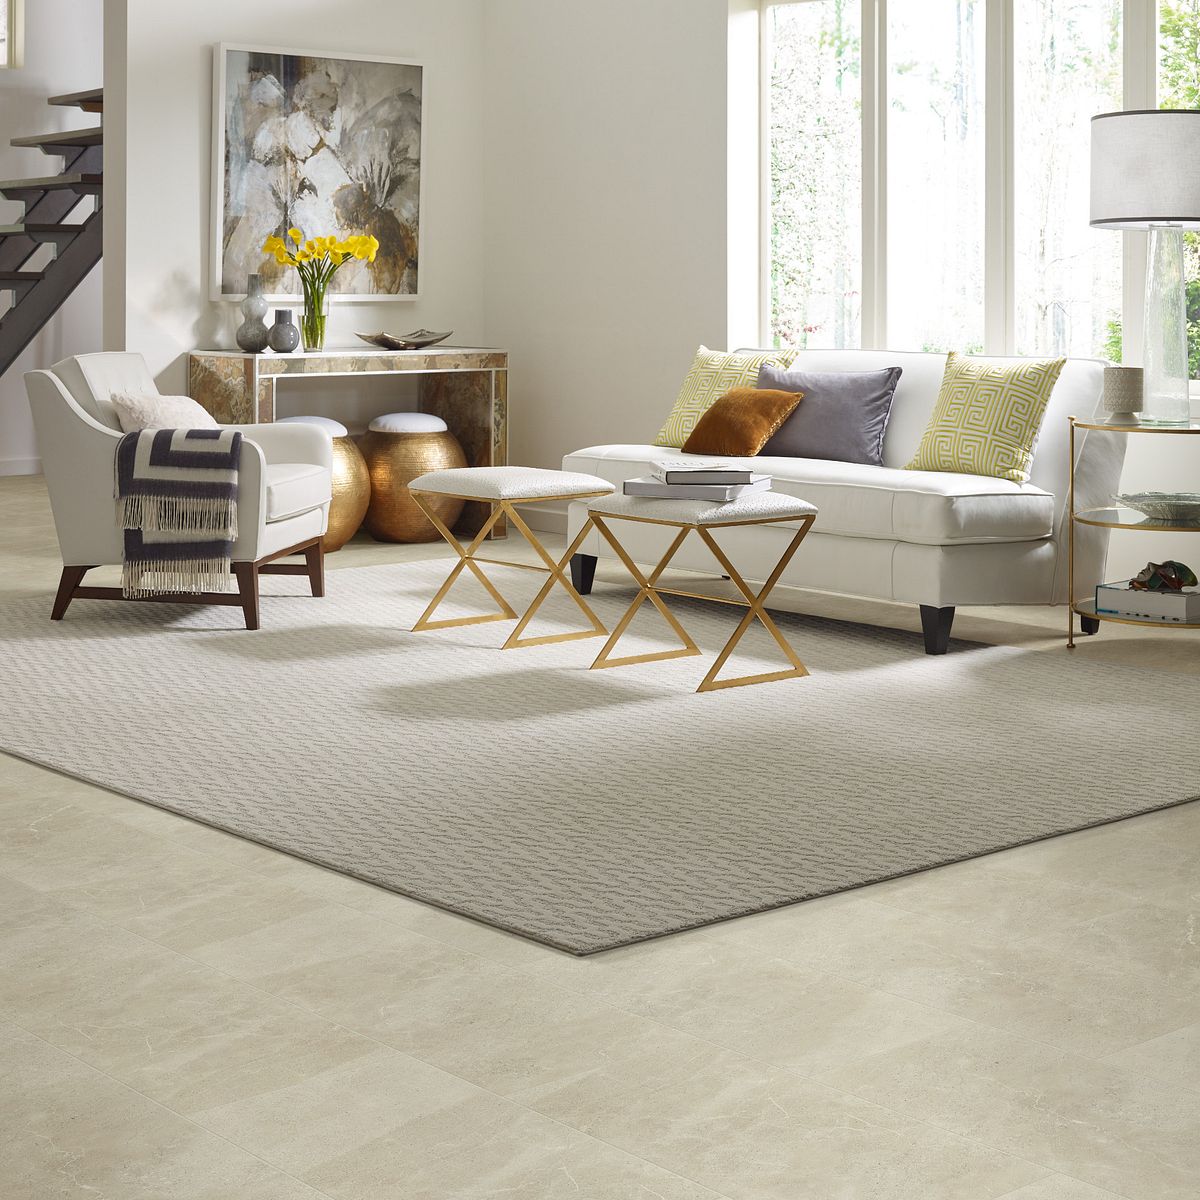 Flooring 101 From Floor Cleaning, Rugs By Shaw